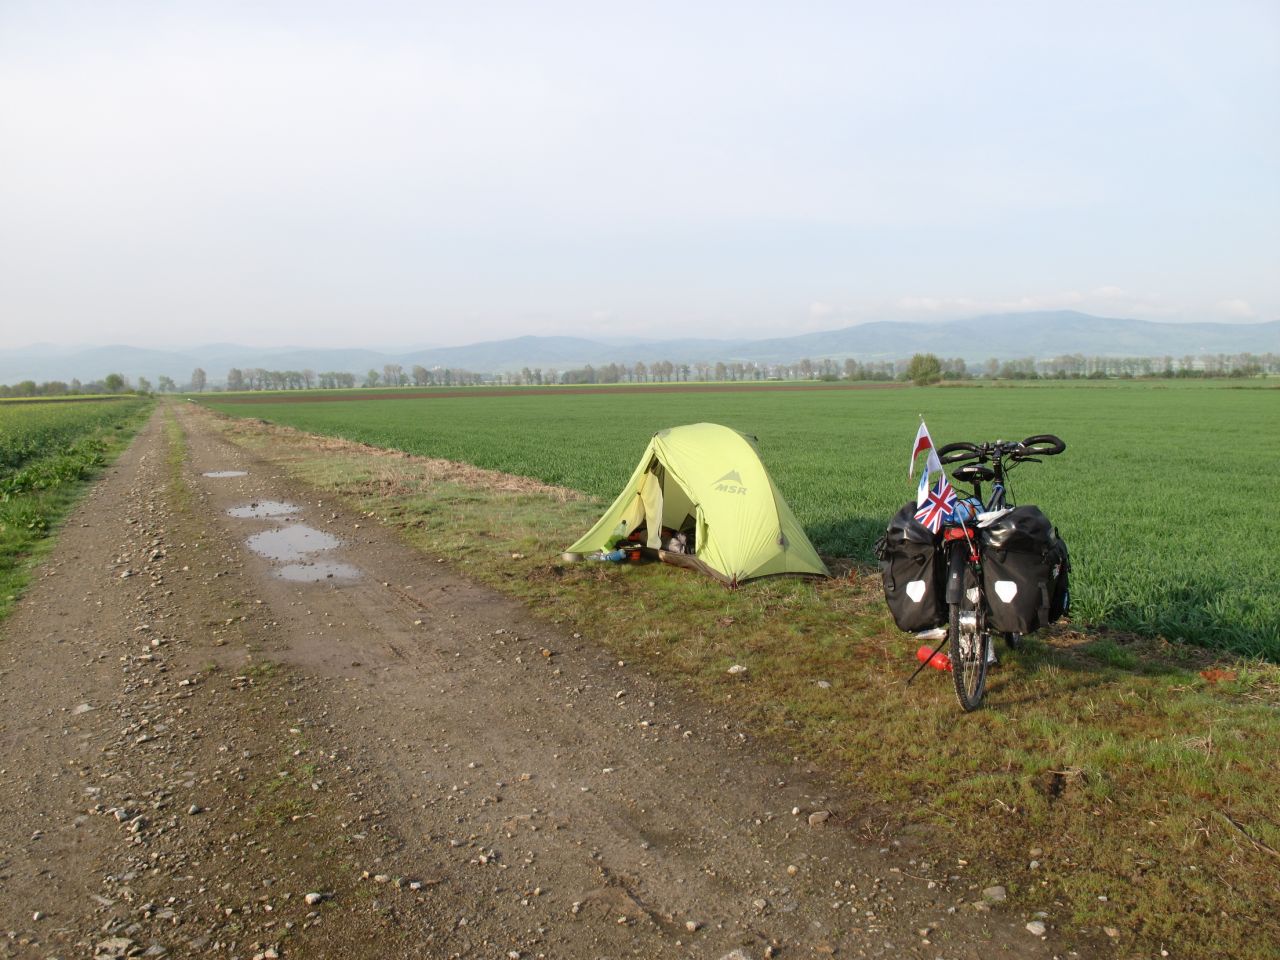 Along the way Outen says she has had to camp wherever there is a good site. Here a makeshift campsite is made by the roadside in Poland on April 27, 2011.